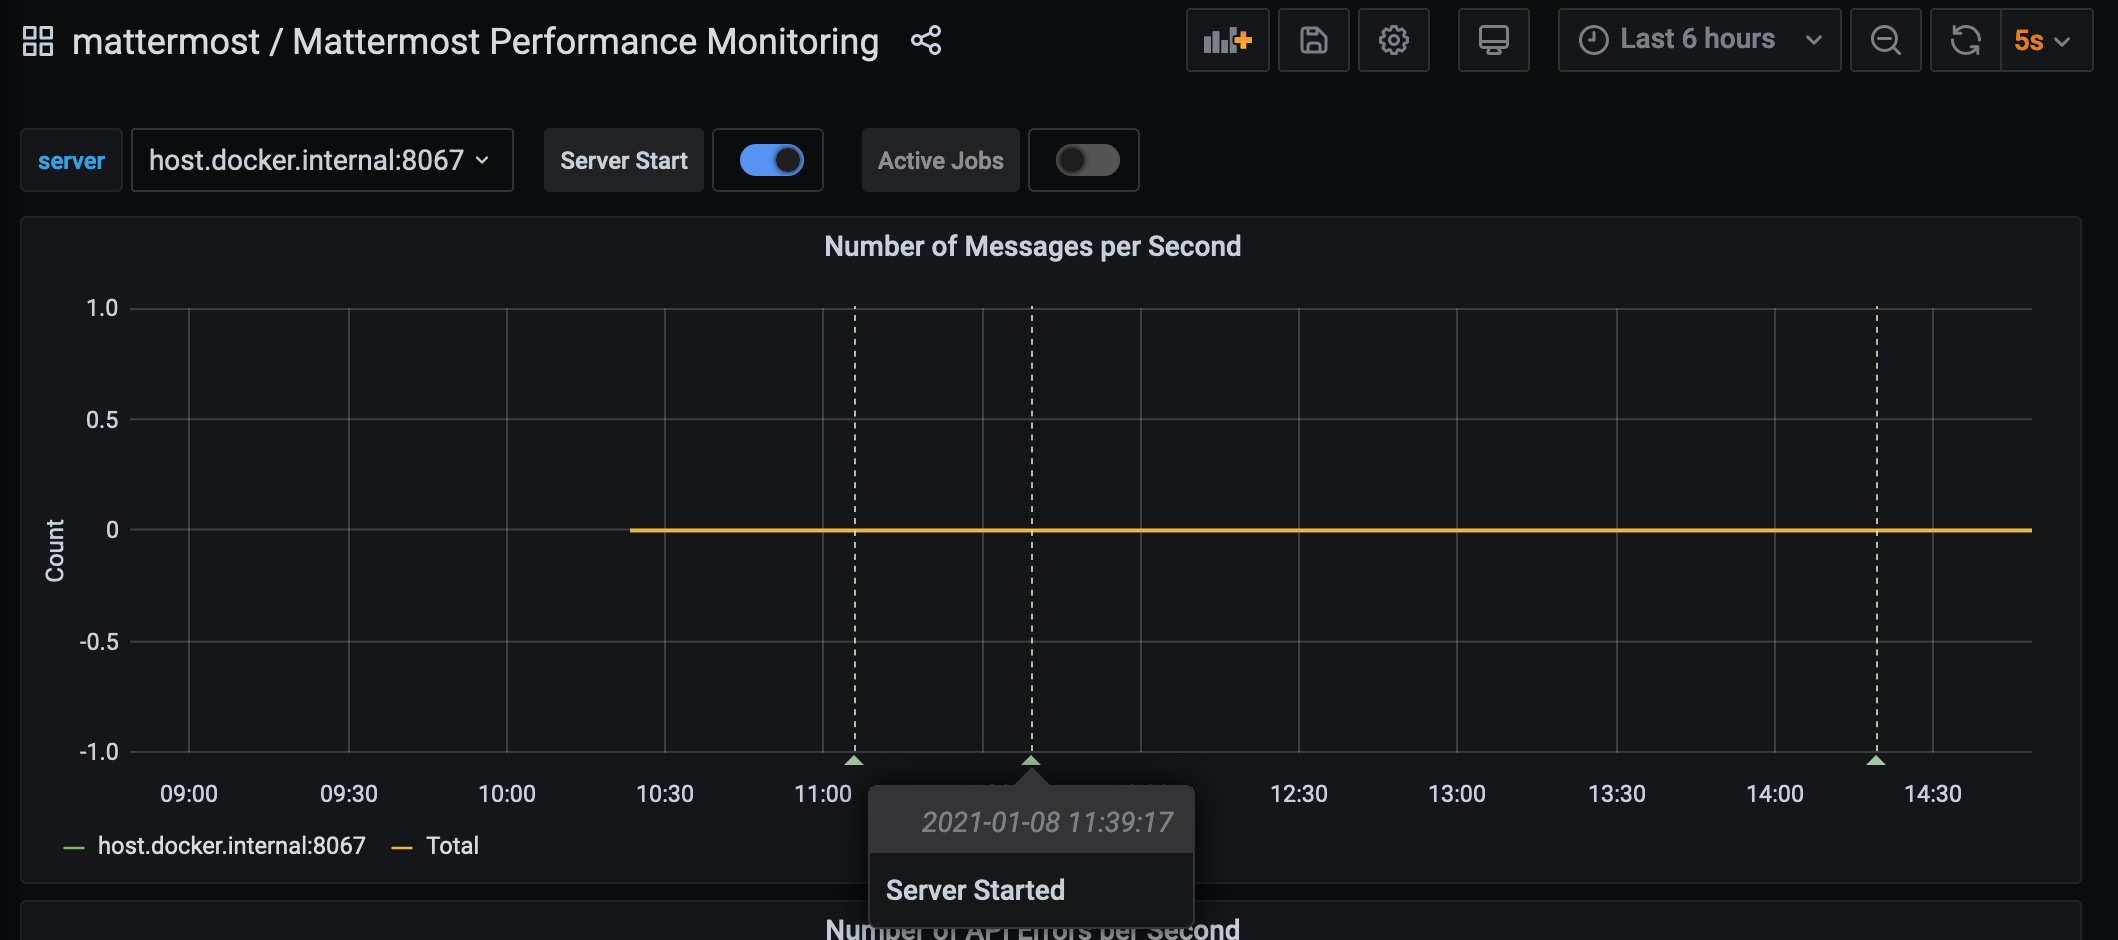 Example debugging metrics, including number of messages per second, in a self-hosted Mattermost deployment.